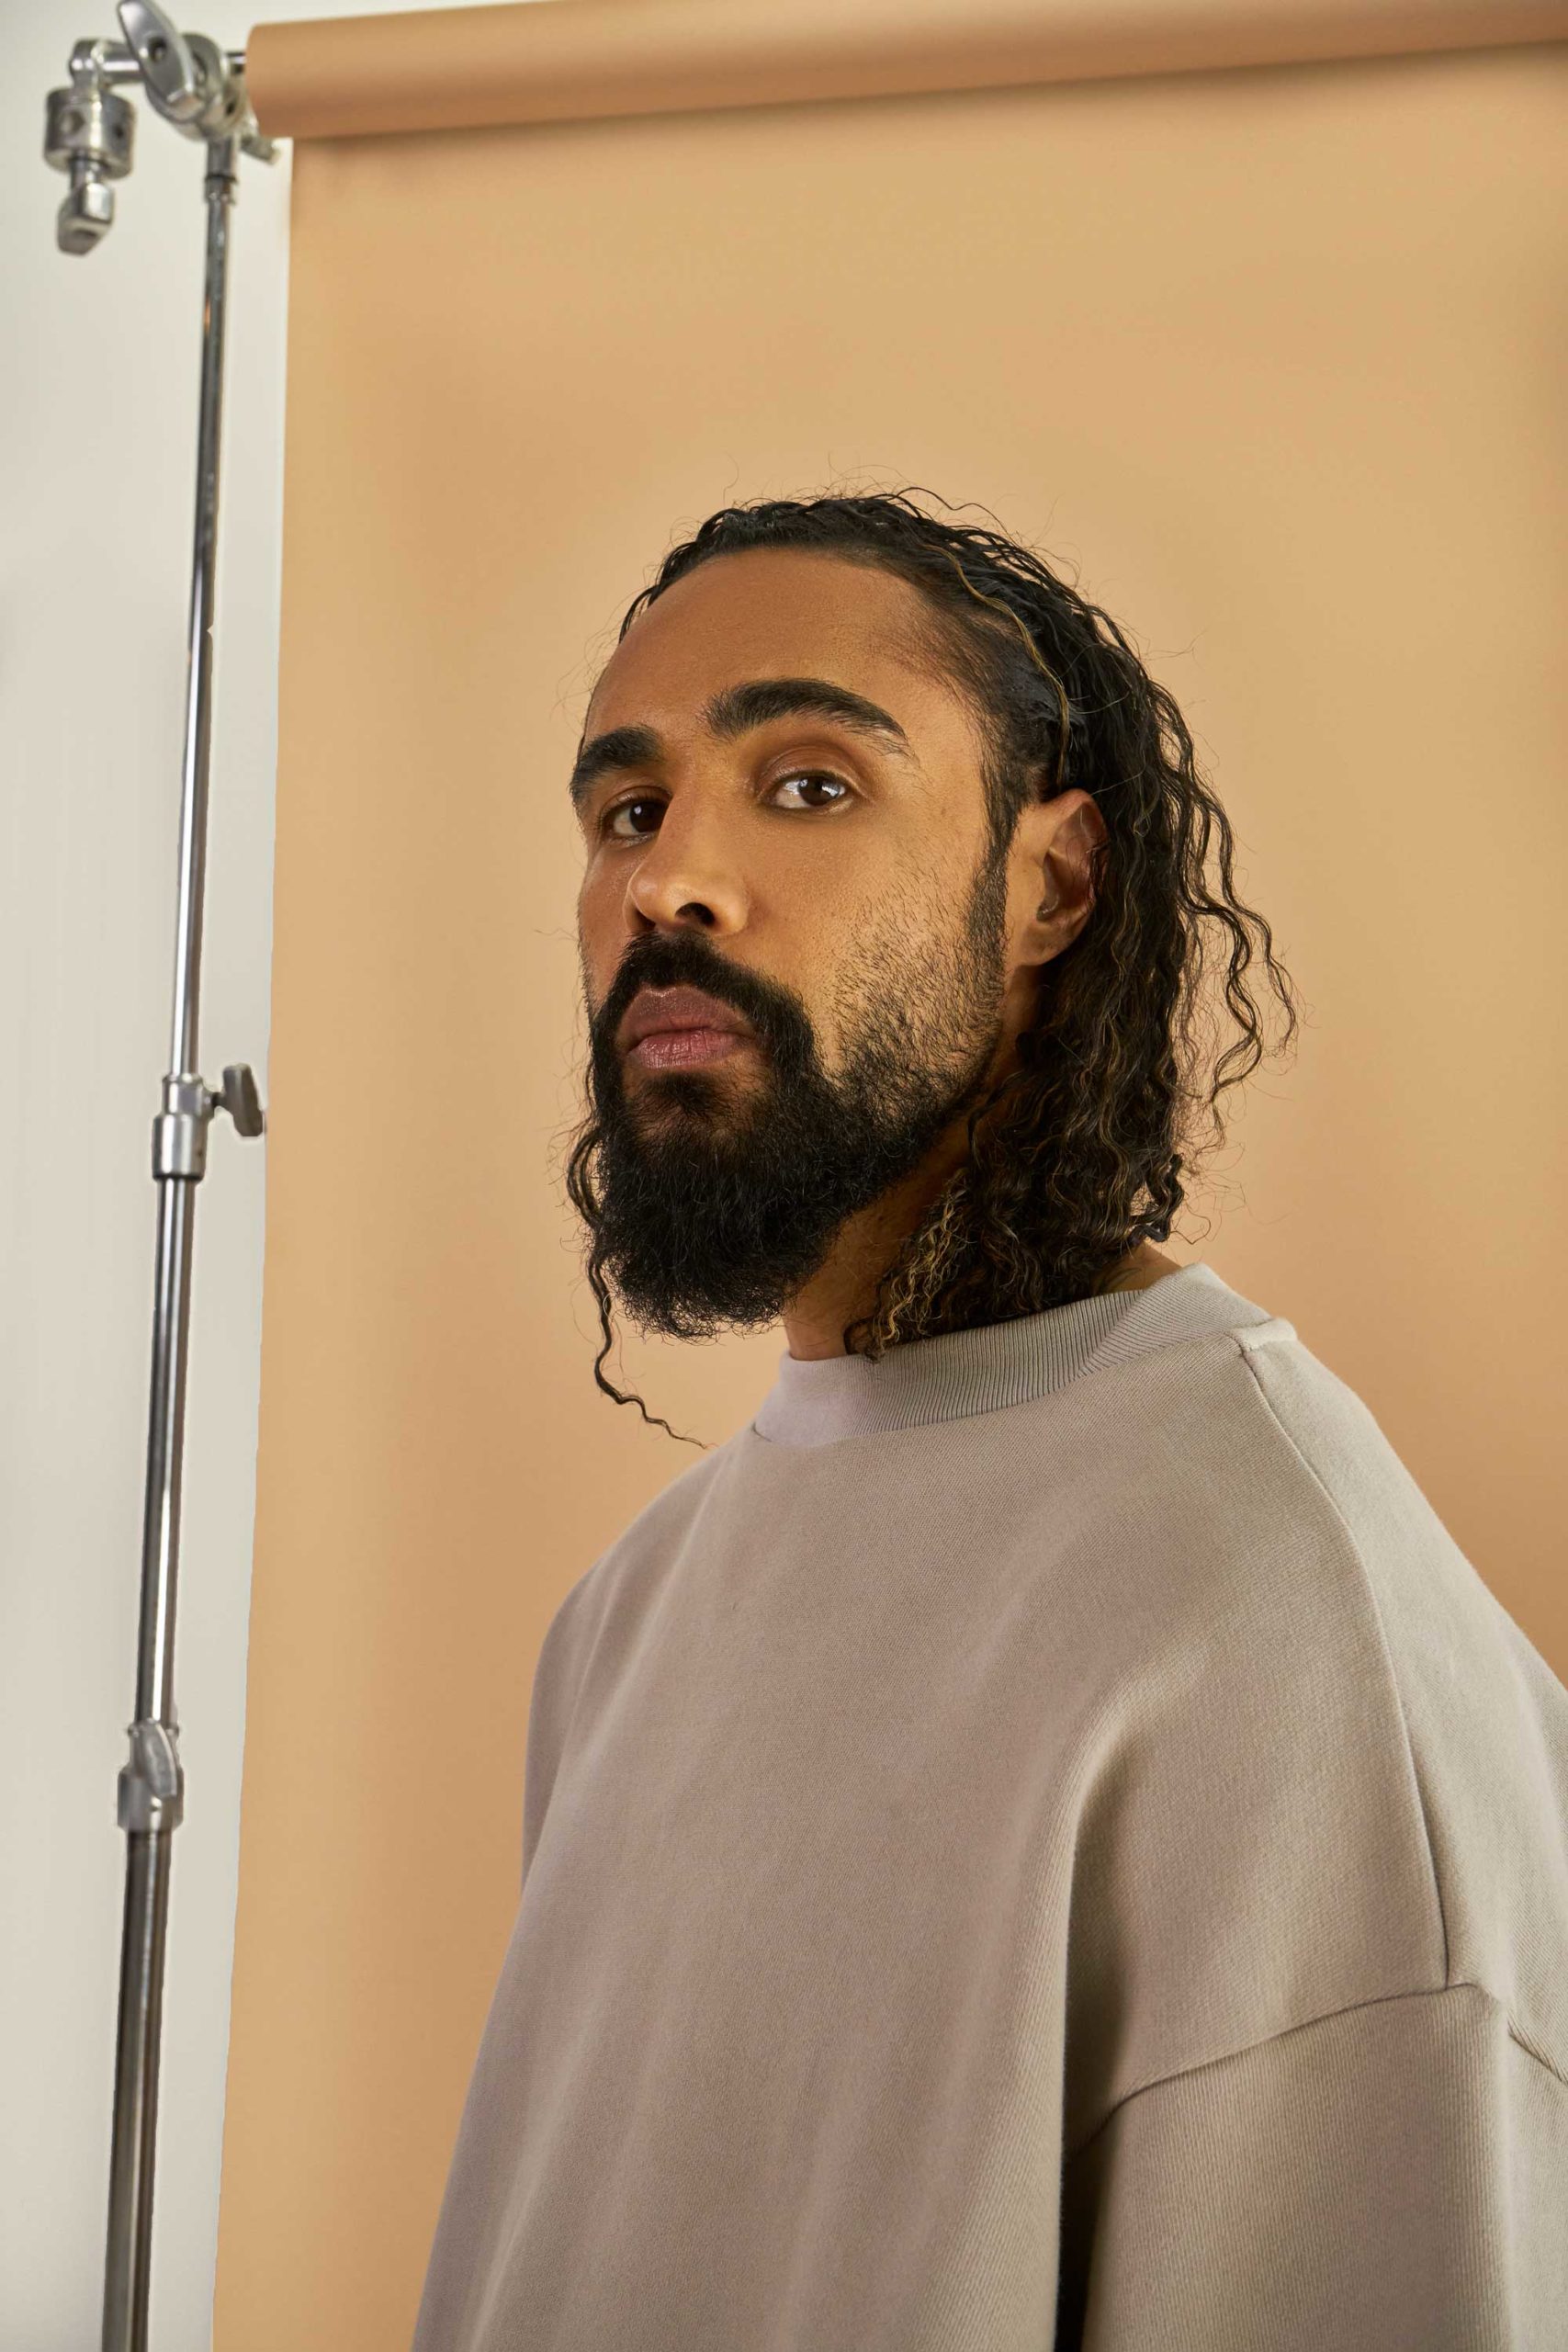 Fear Of God; Jerry Lorenzo - The Streetwear Brand With A Social